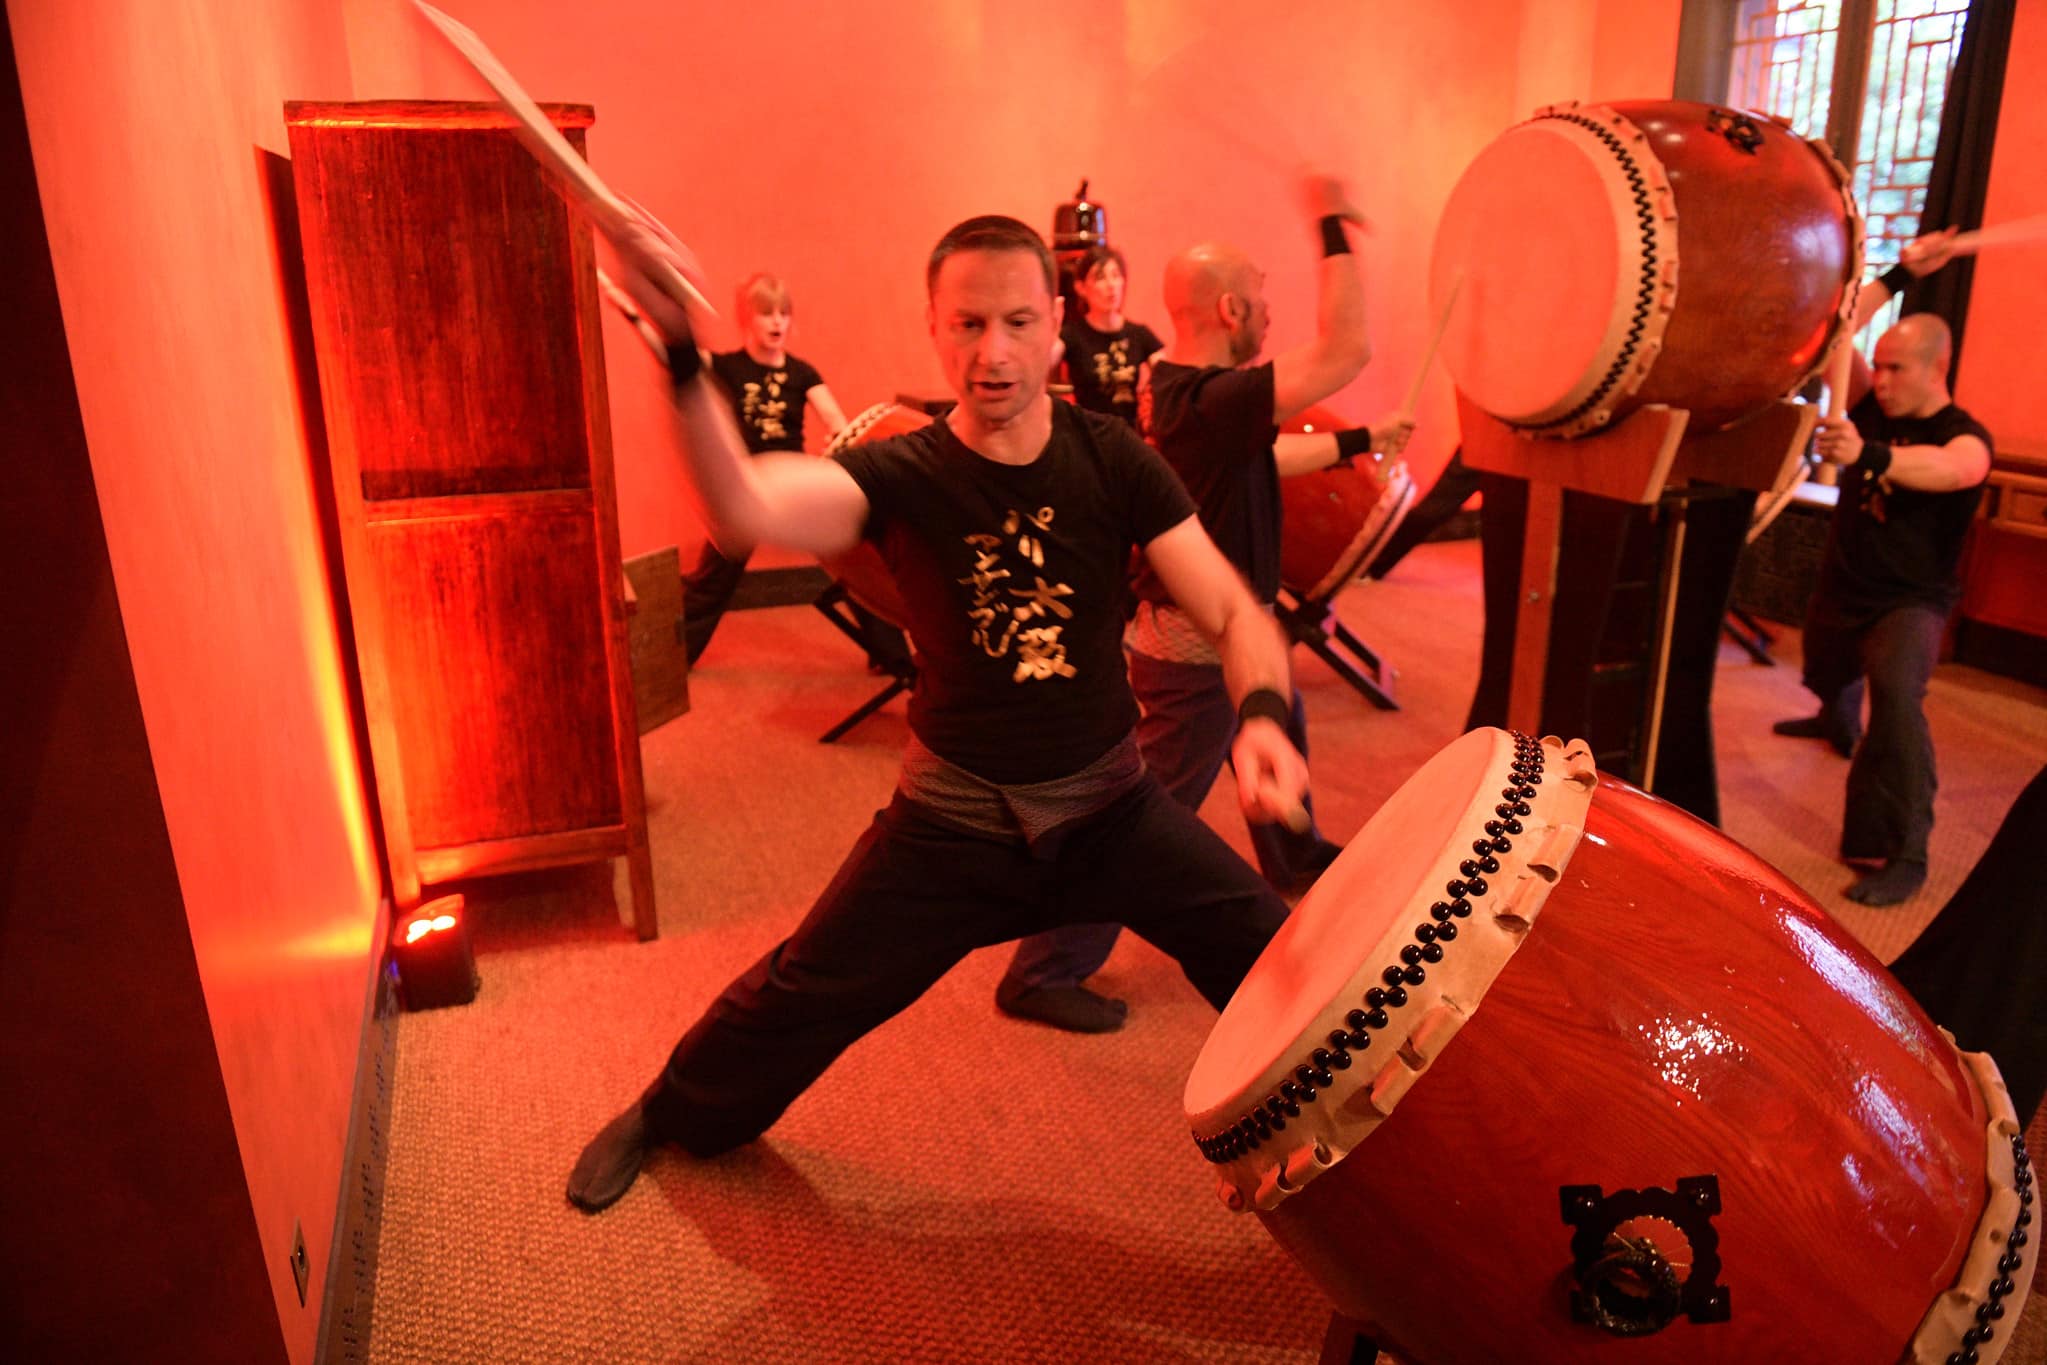 paris taiko percussions japonaises tambours japonais performance musiciens hotel particulier pagode chinoise tintin fun paris acteurs chine france agence wato we are the oracle evenementiel events